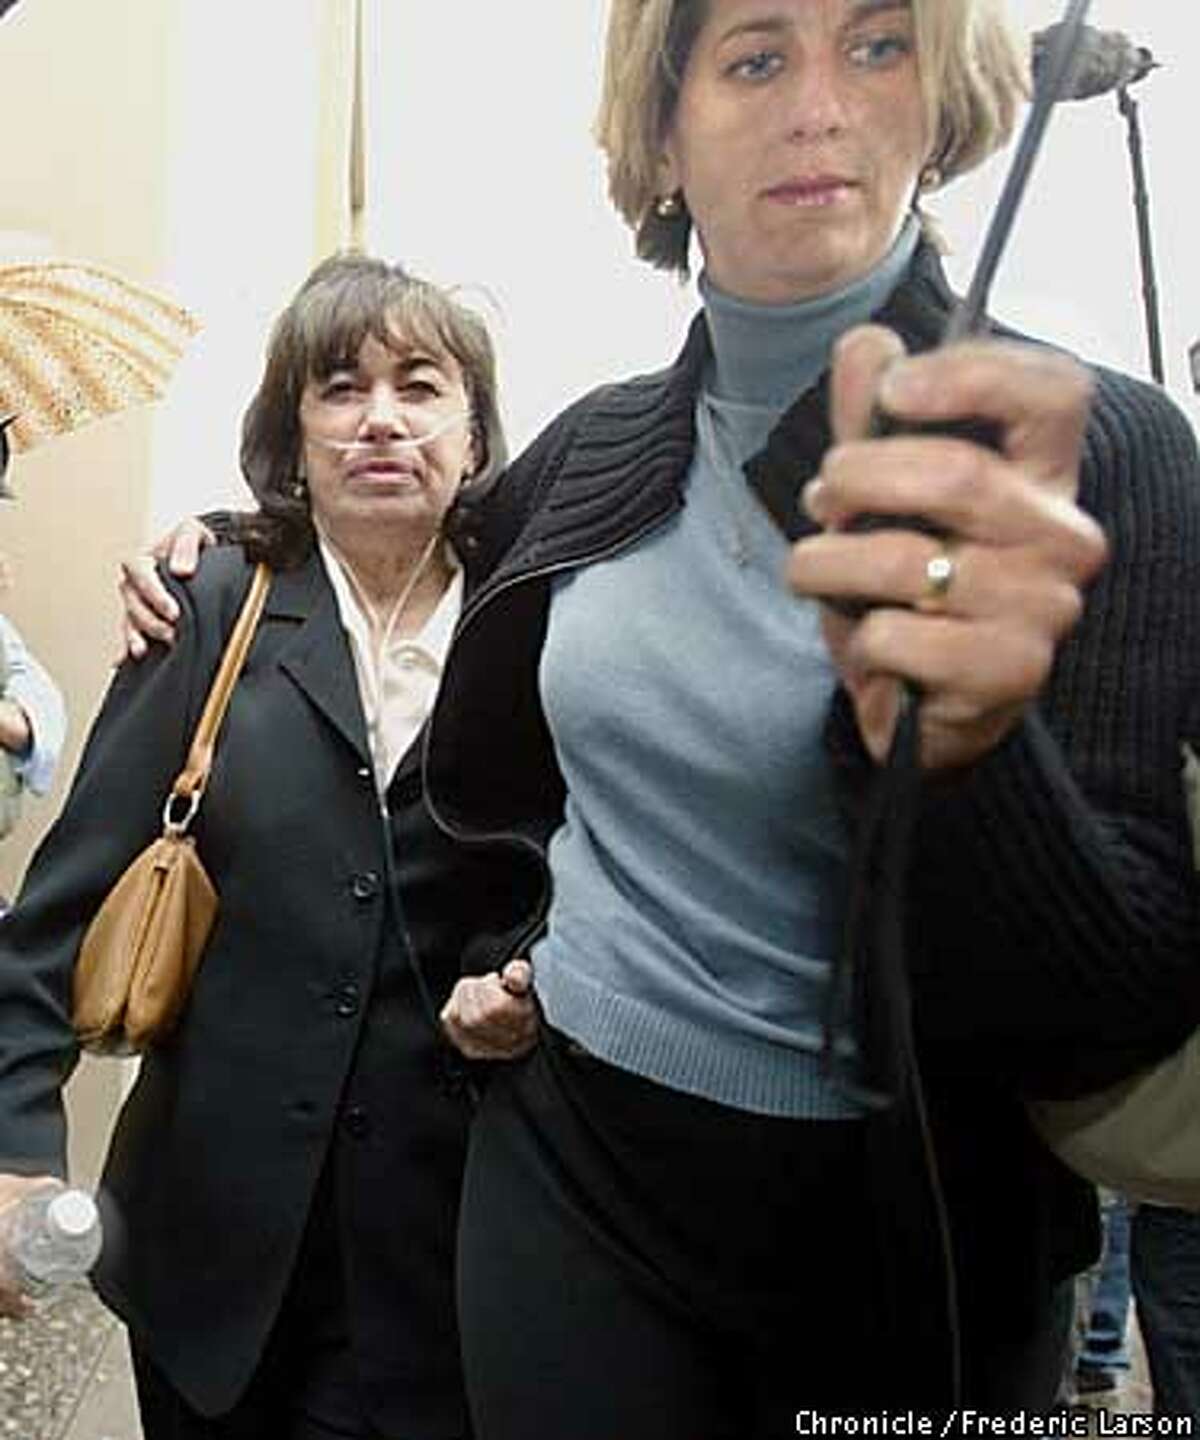 BODIES2-C-21APR03-MT-FRL: Jackie Peterson the mother of accused murderer Scott Peterson was escorted by her daughter-in-law Janey Peterson to the Stanislaus County Superior Court in Modesto for Scott's arraignment. Scott Peterson pleaded innocent Monday to killing his pregnant wife and unborn son, as prosecutors filed charges against him that could bring the death penalty. Chronicle photo by Frederic Larson